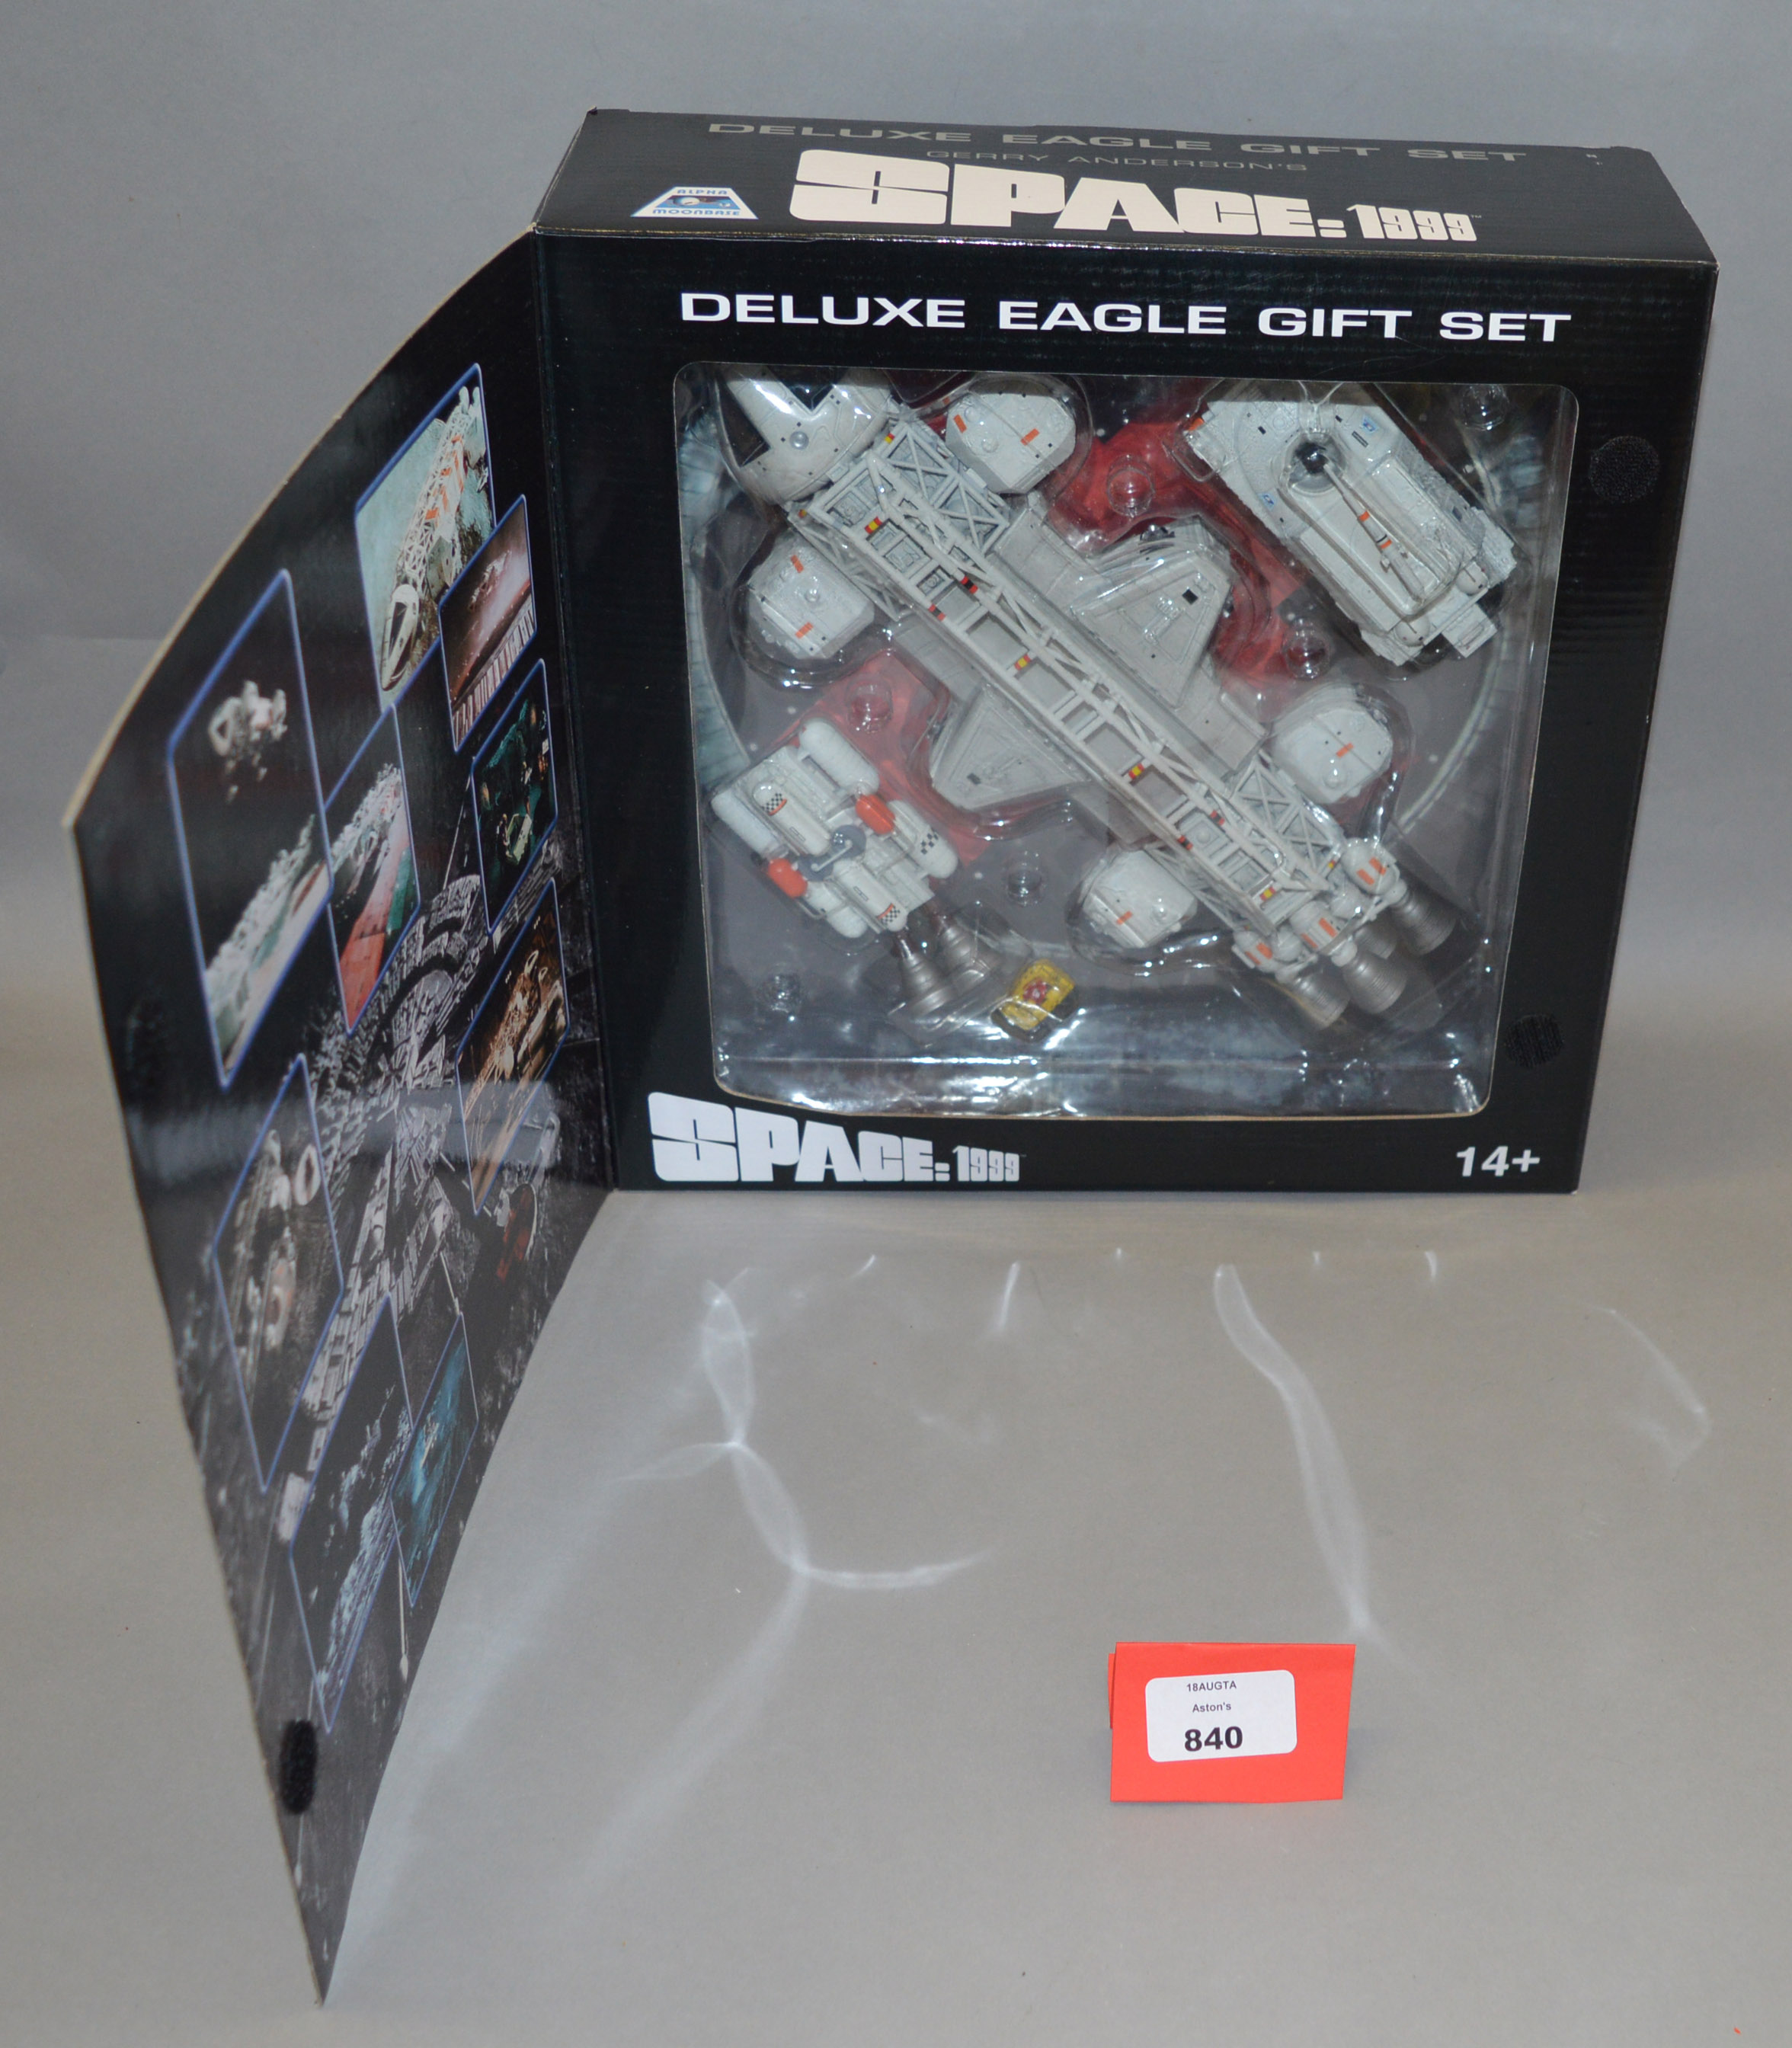 A boxed 'Product Enterprise' Gerry Anderson 'Space 1999' TV series related diecast model Gift Set, - Image 2 of 2